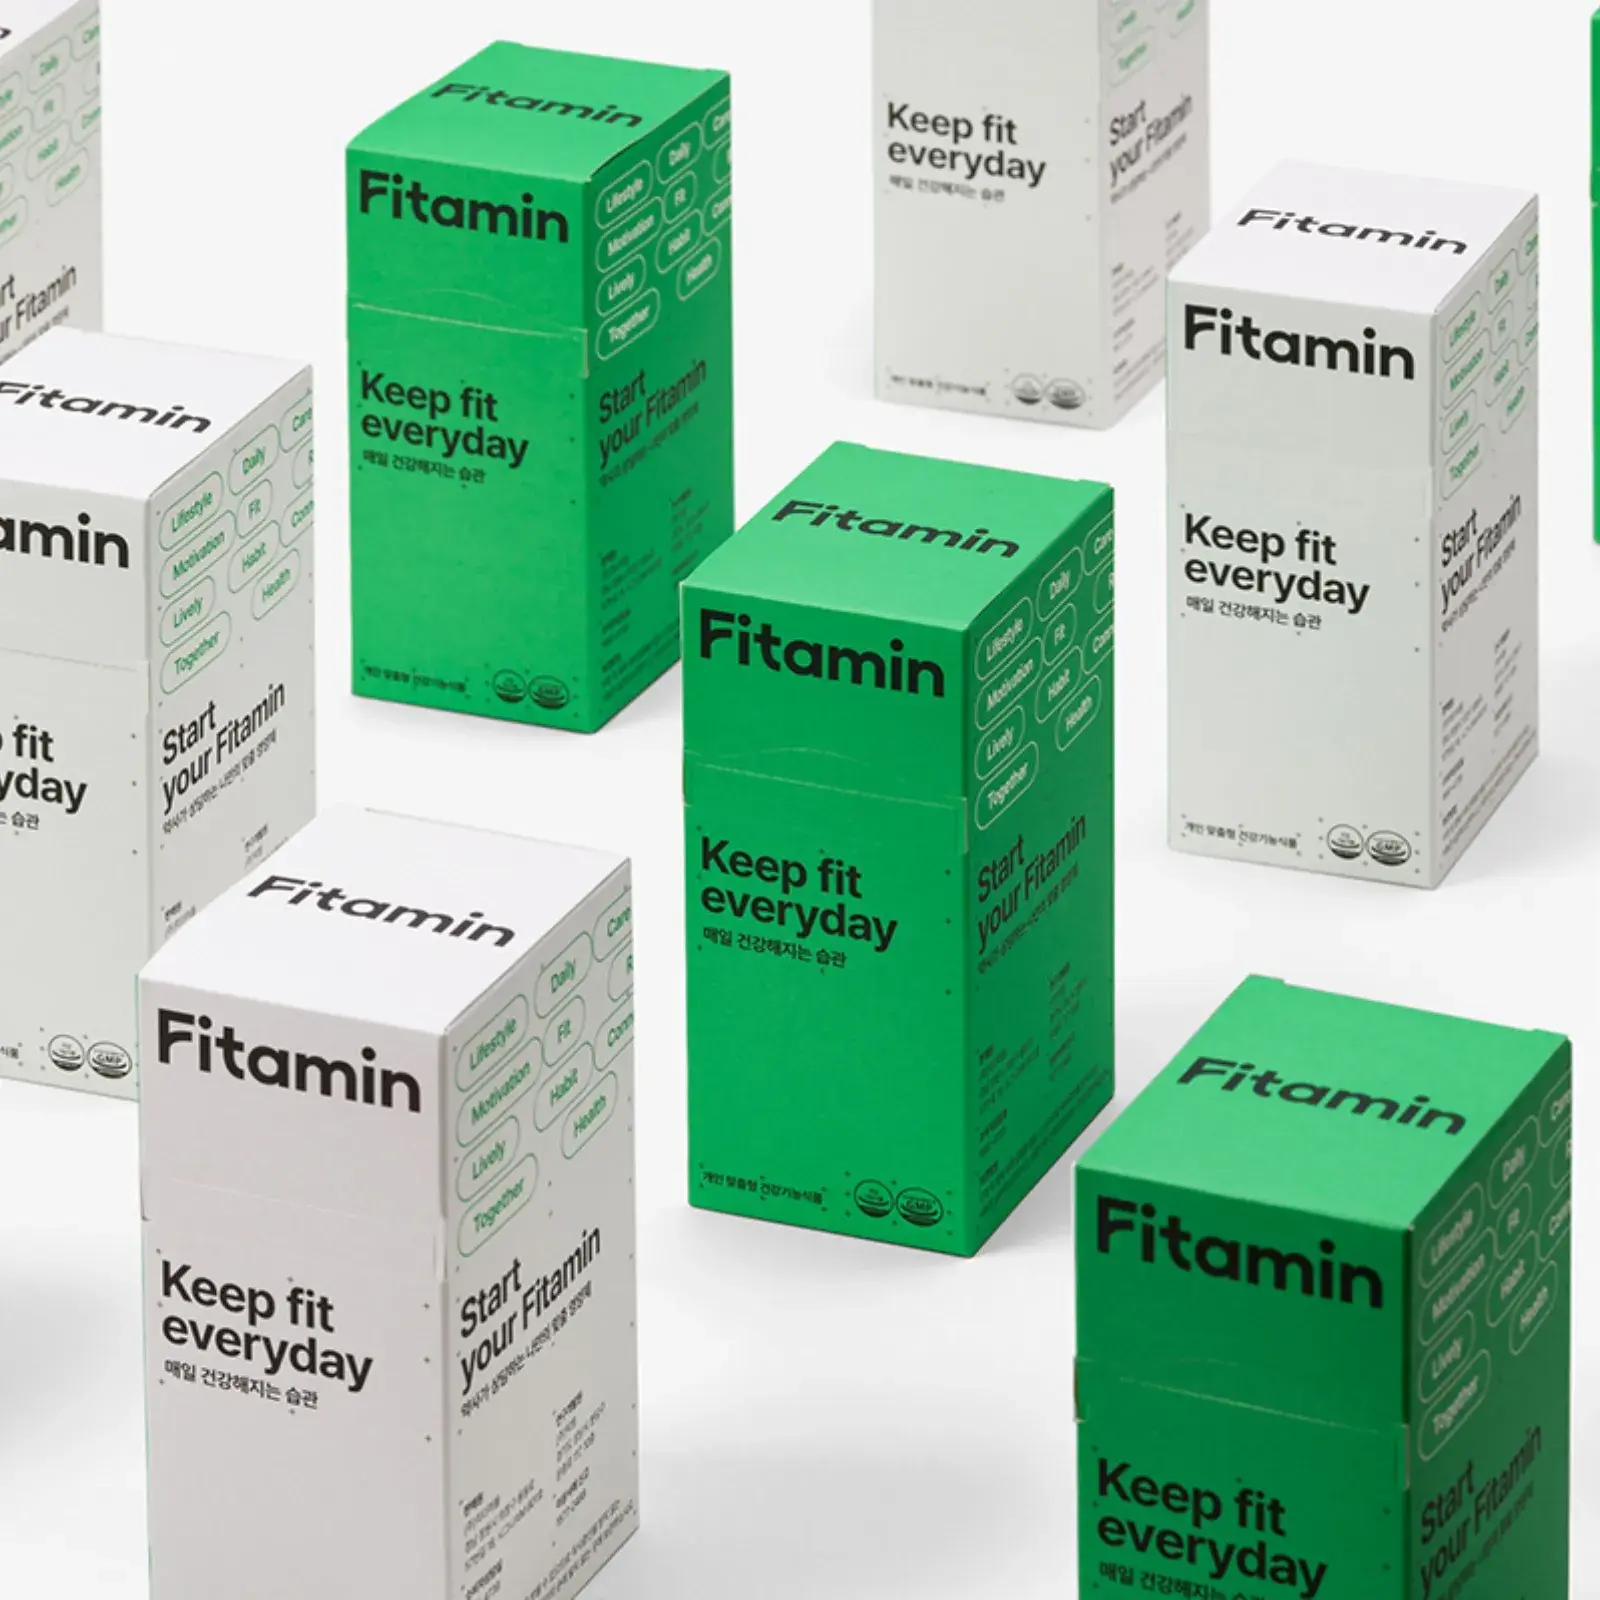 Effective Packaging Design for Fitamin’s Health Products